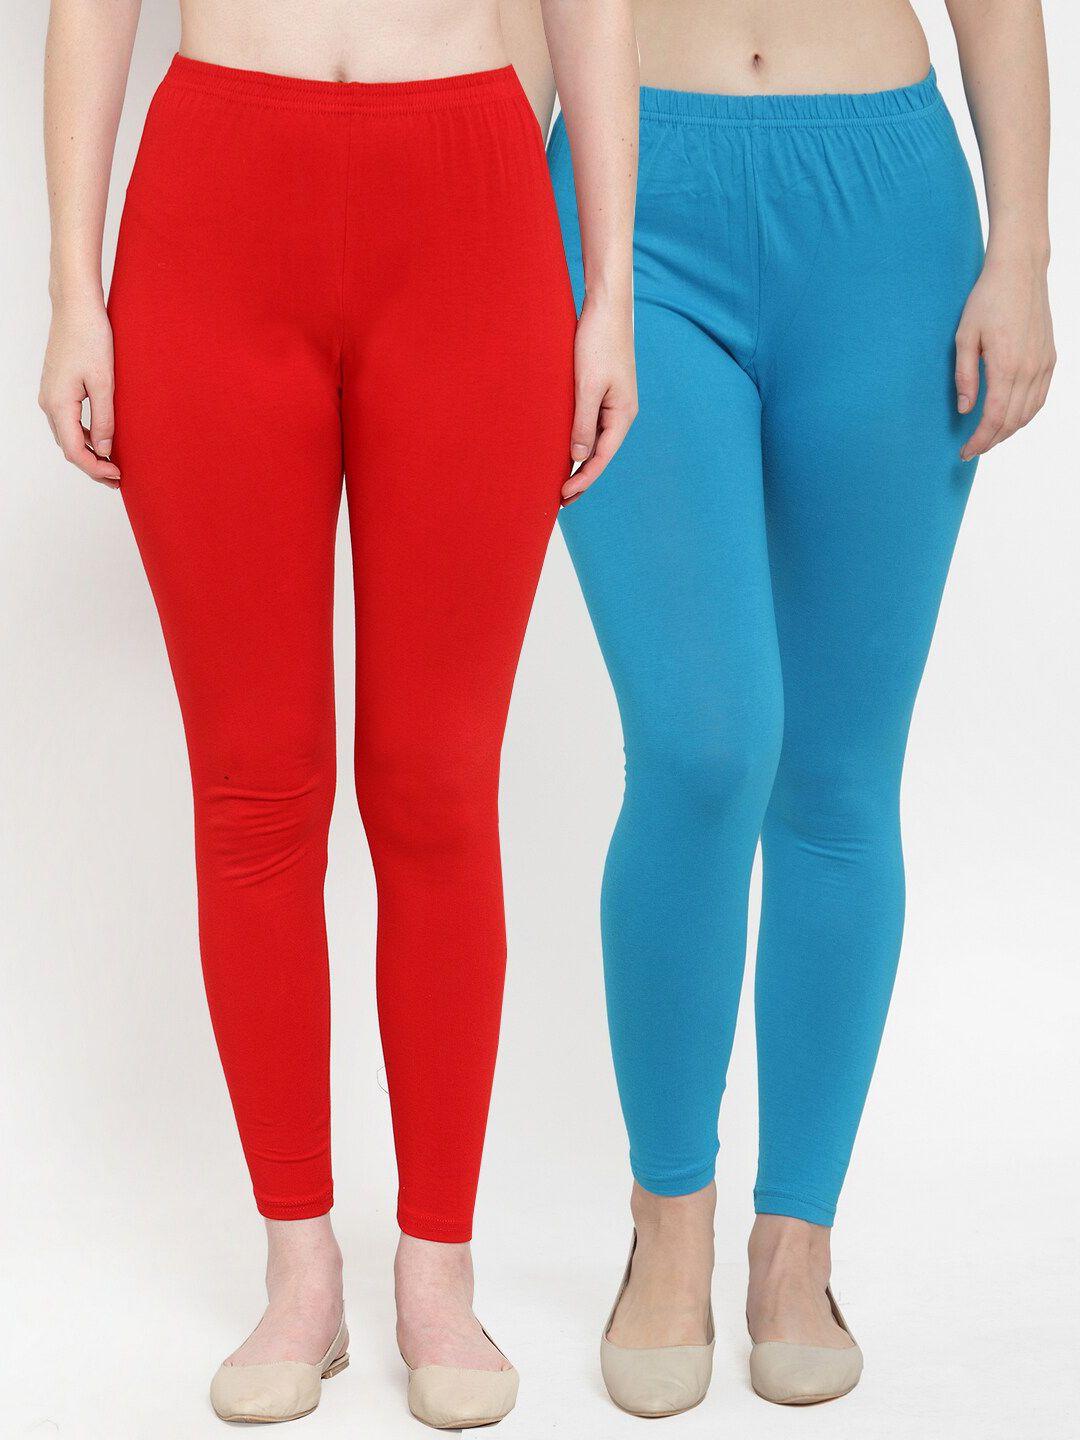 gracit women red & turquoise blue pack of 2 solid ankle-length cotton leggings